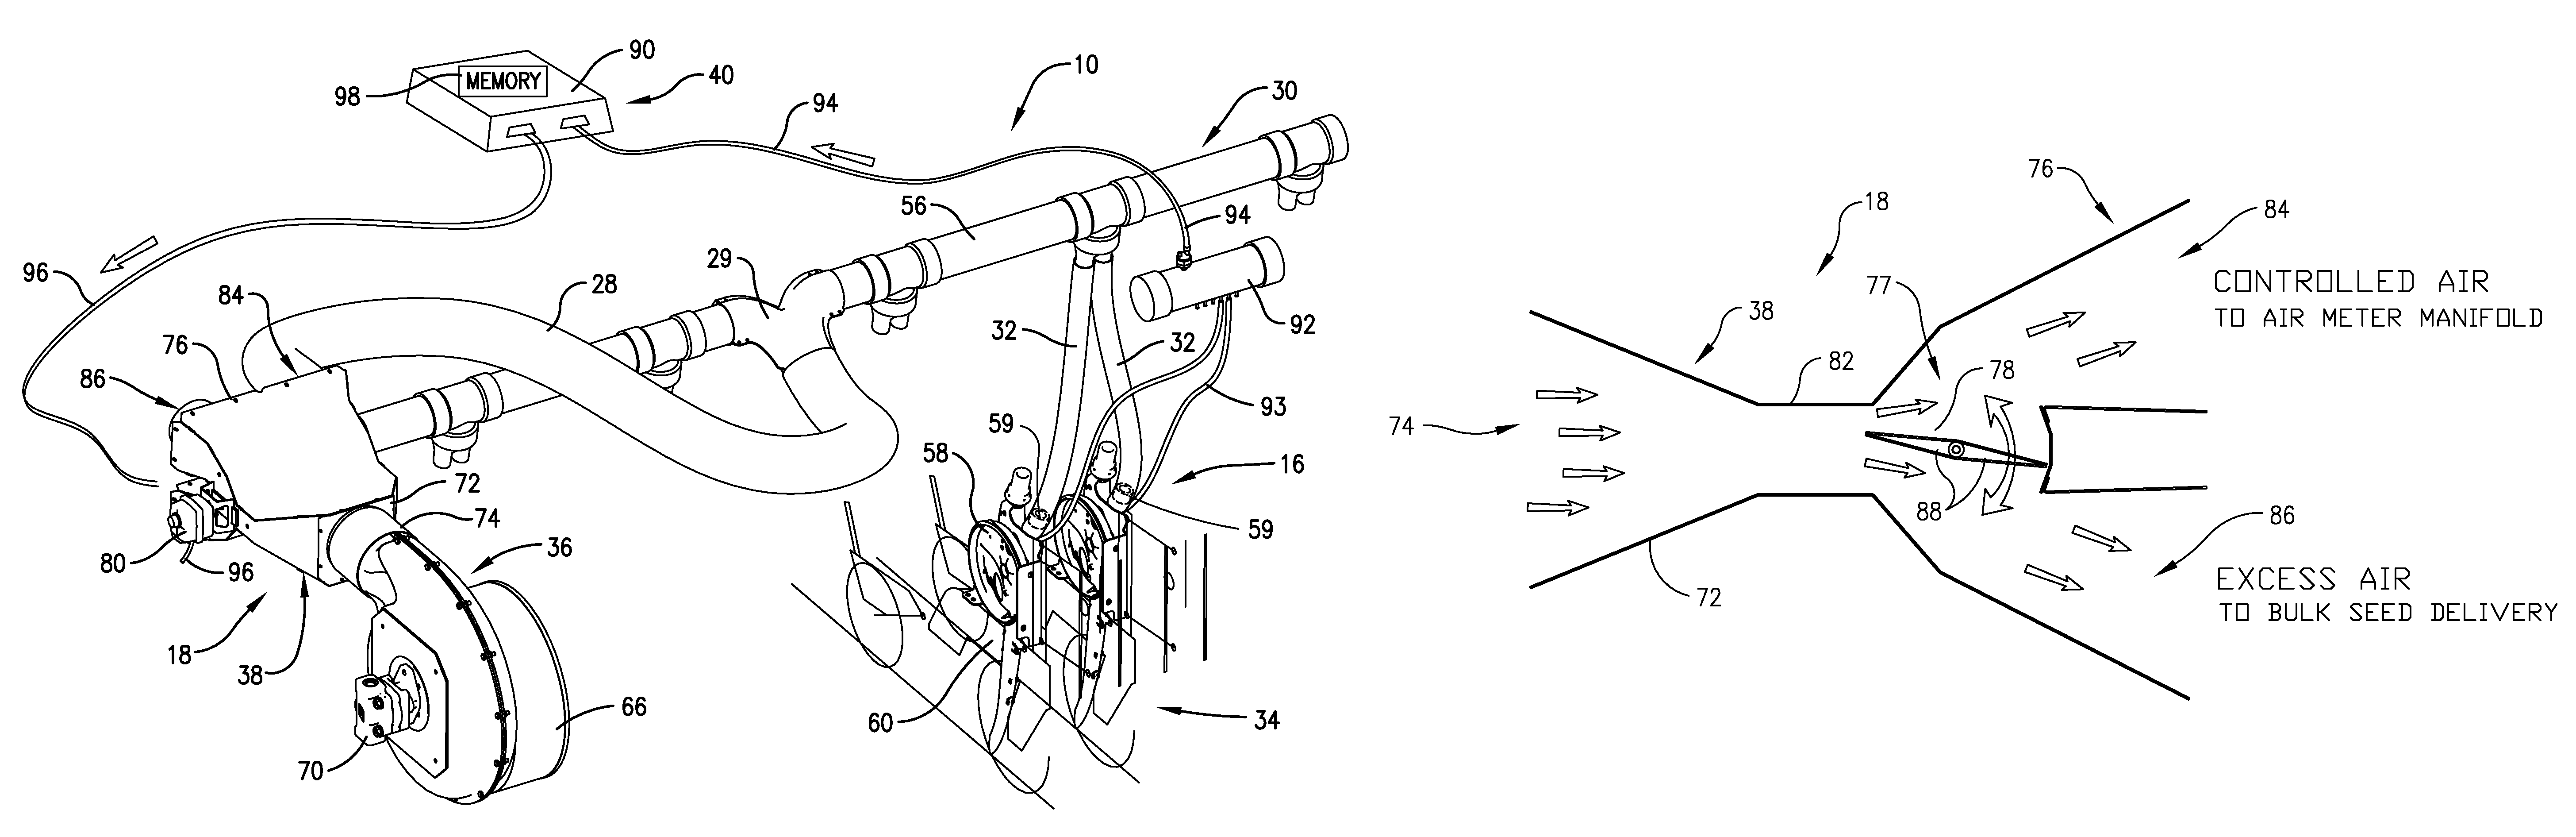 Air-assisted planting system having a single fan with pressure-responsive splitting of air streams for conveying and metering functions